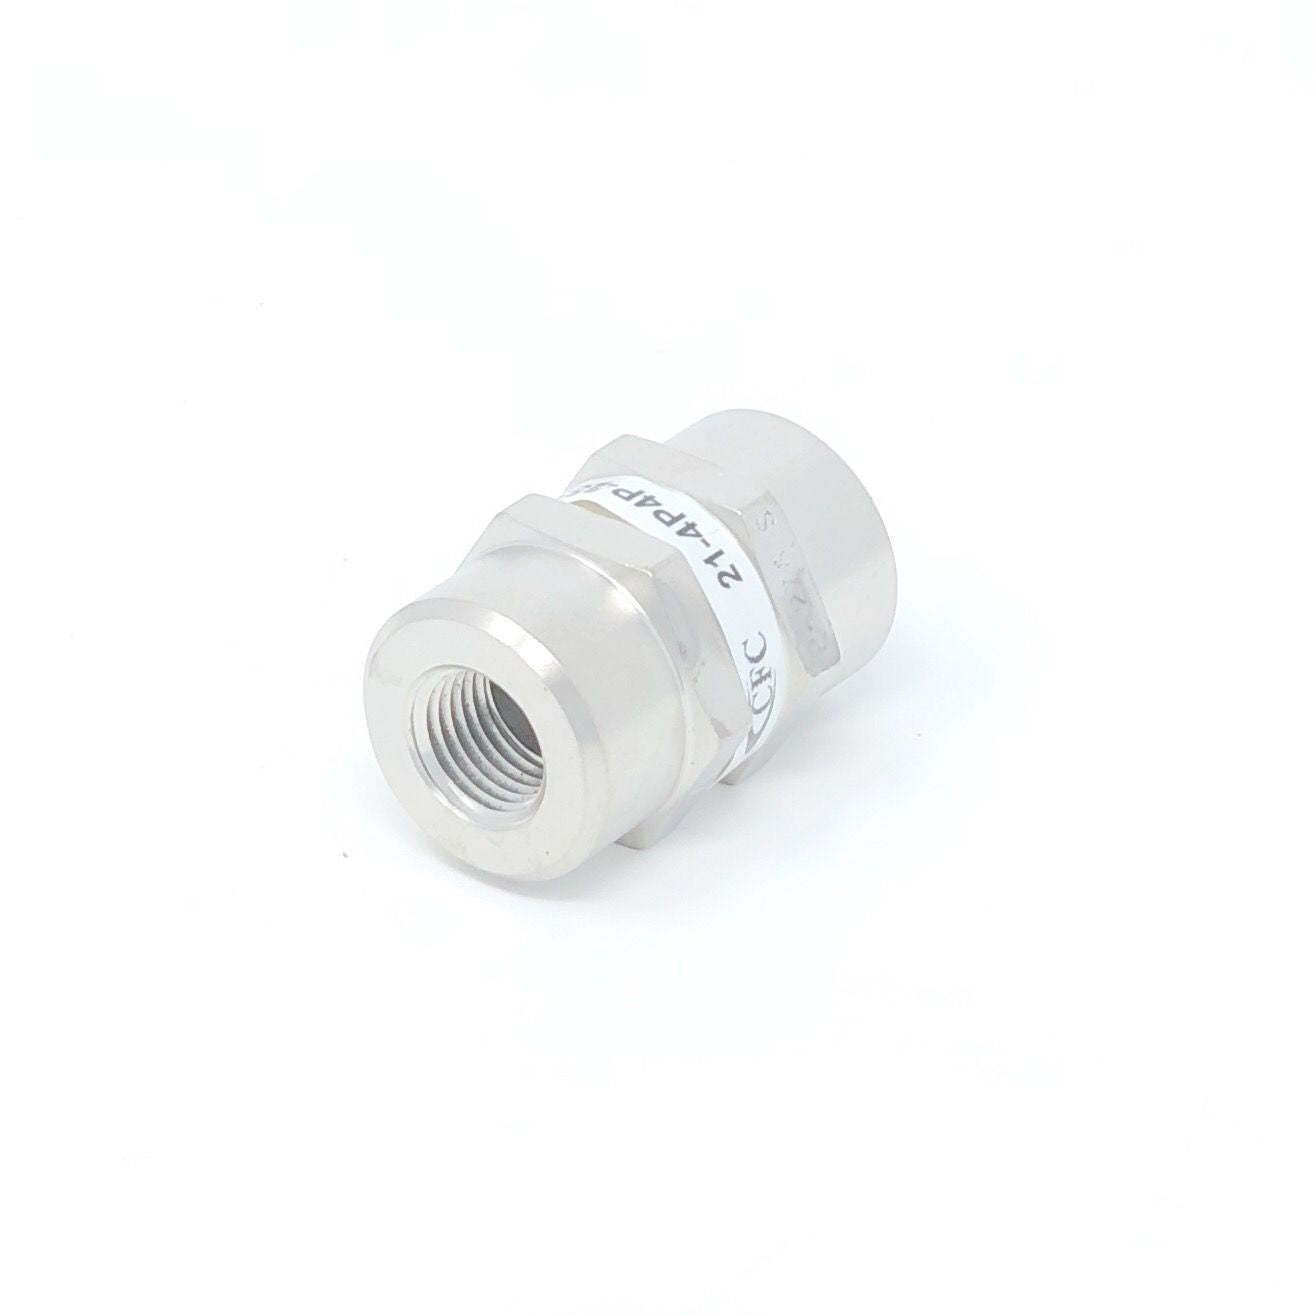 21-12P12P-40S : Chase High Pressure Inline Filter, 3000psi, 3/4" NPT, 40 Micron, No Visual Indicator, No Bypass